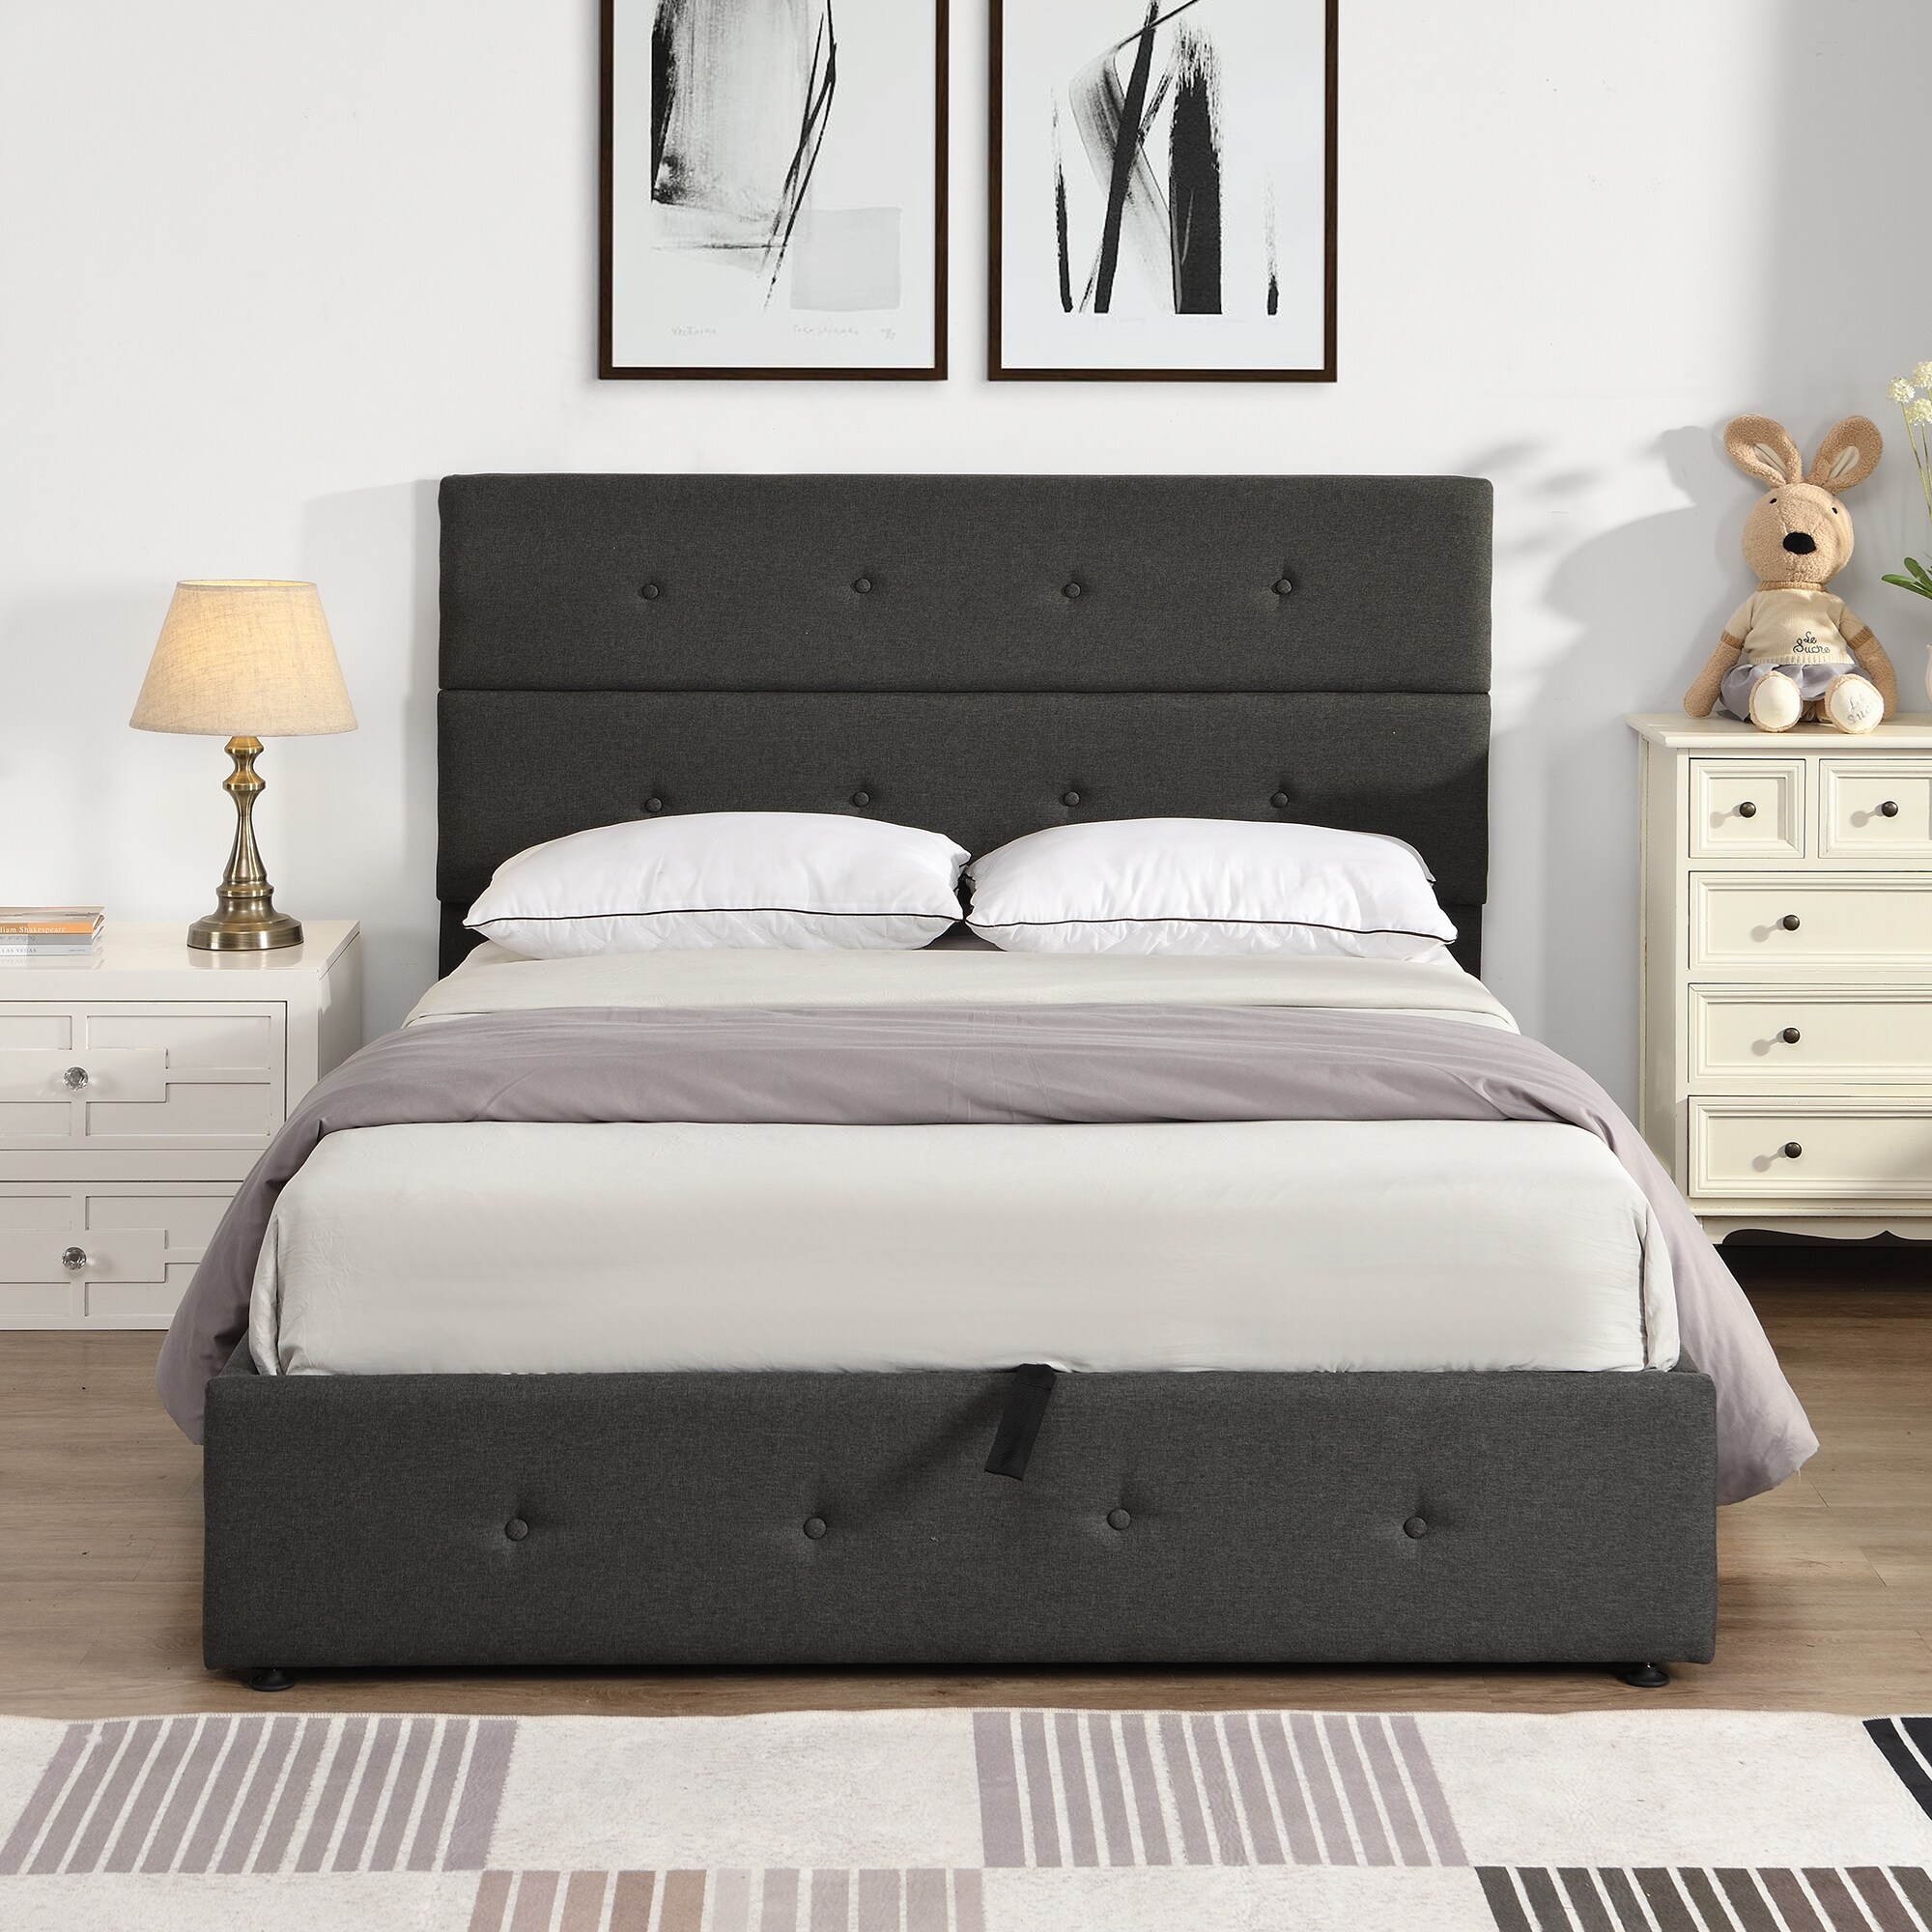 Linen Upholstered Platform Bed With Underneath Gas Lift Up Storage